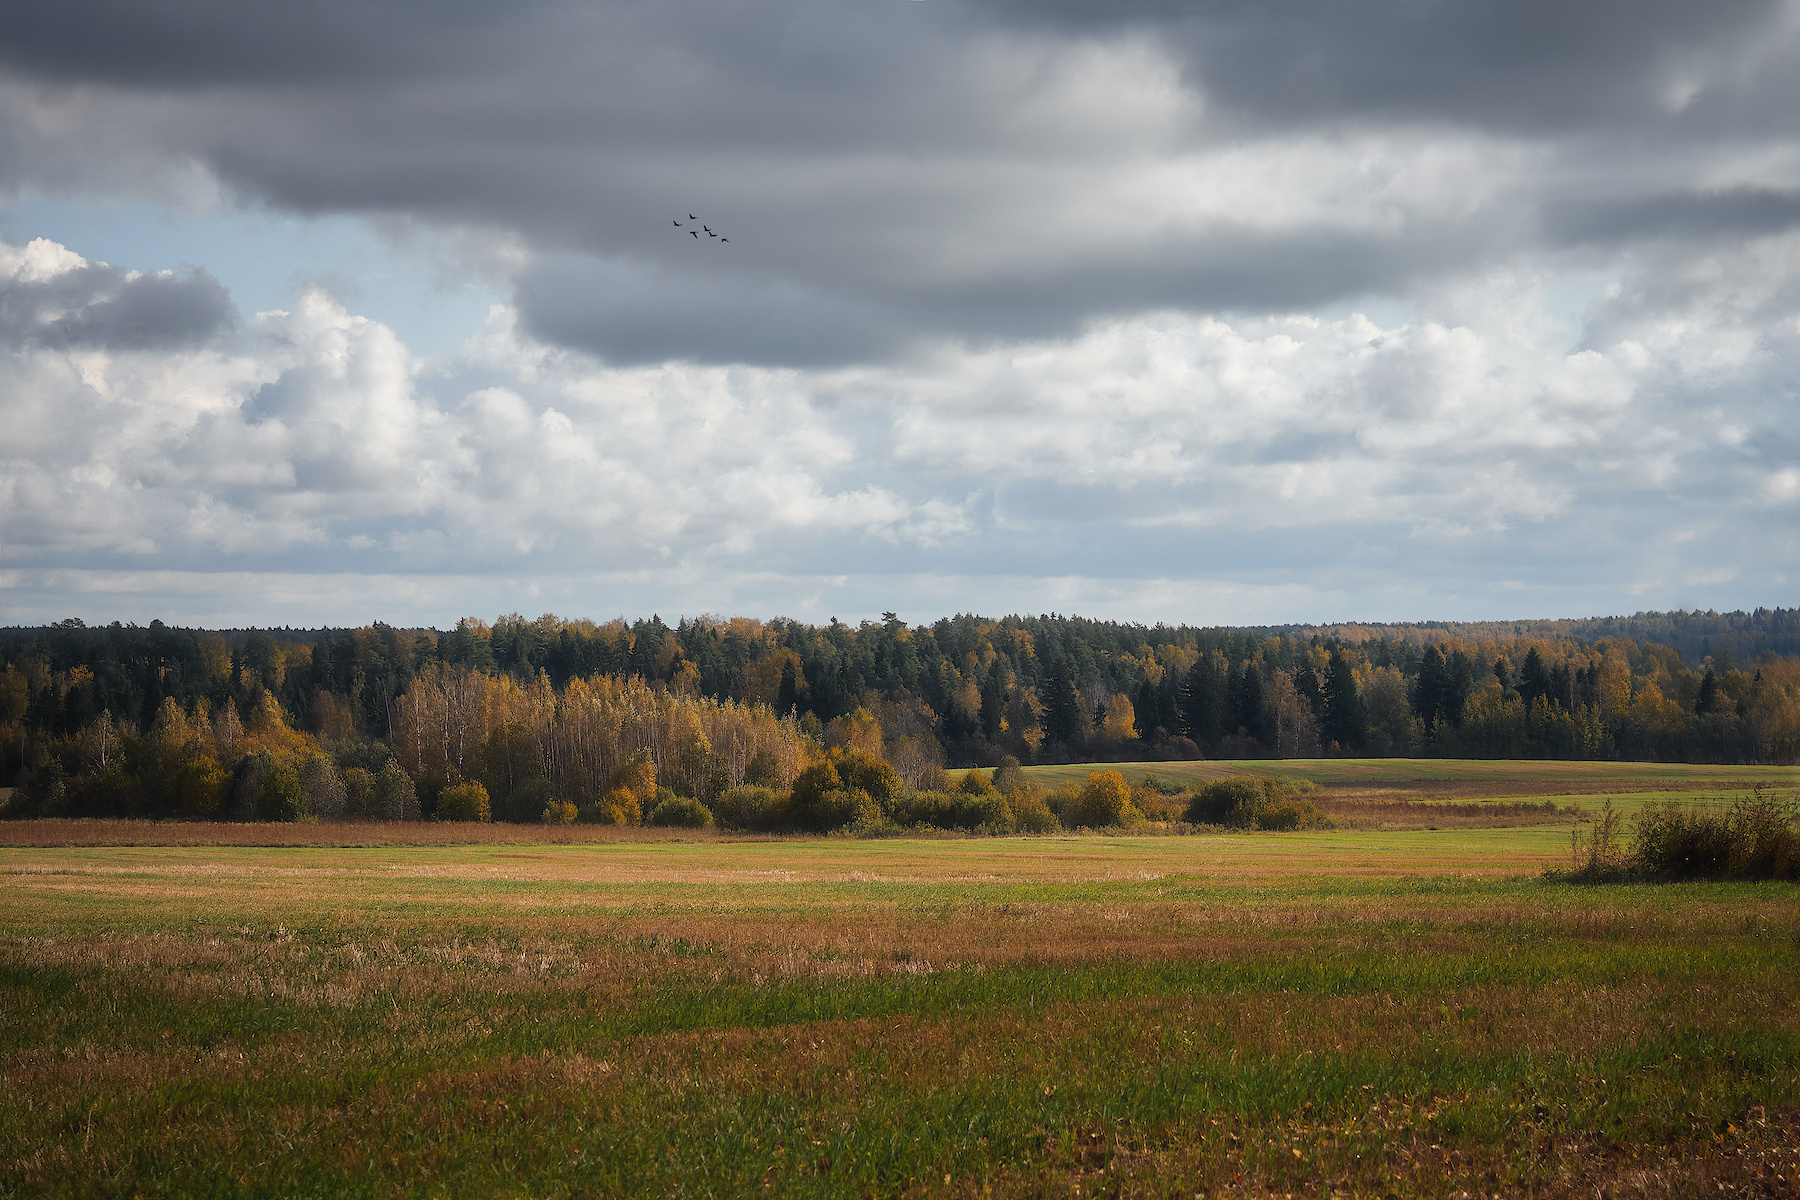 Open spaces - Landscape, Sky, Forest, Tree, Field, Clouds, Olympus, The photo, My